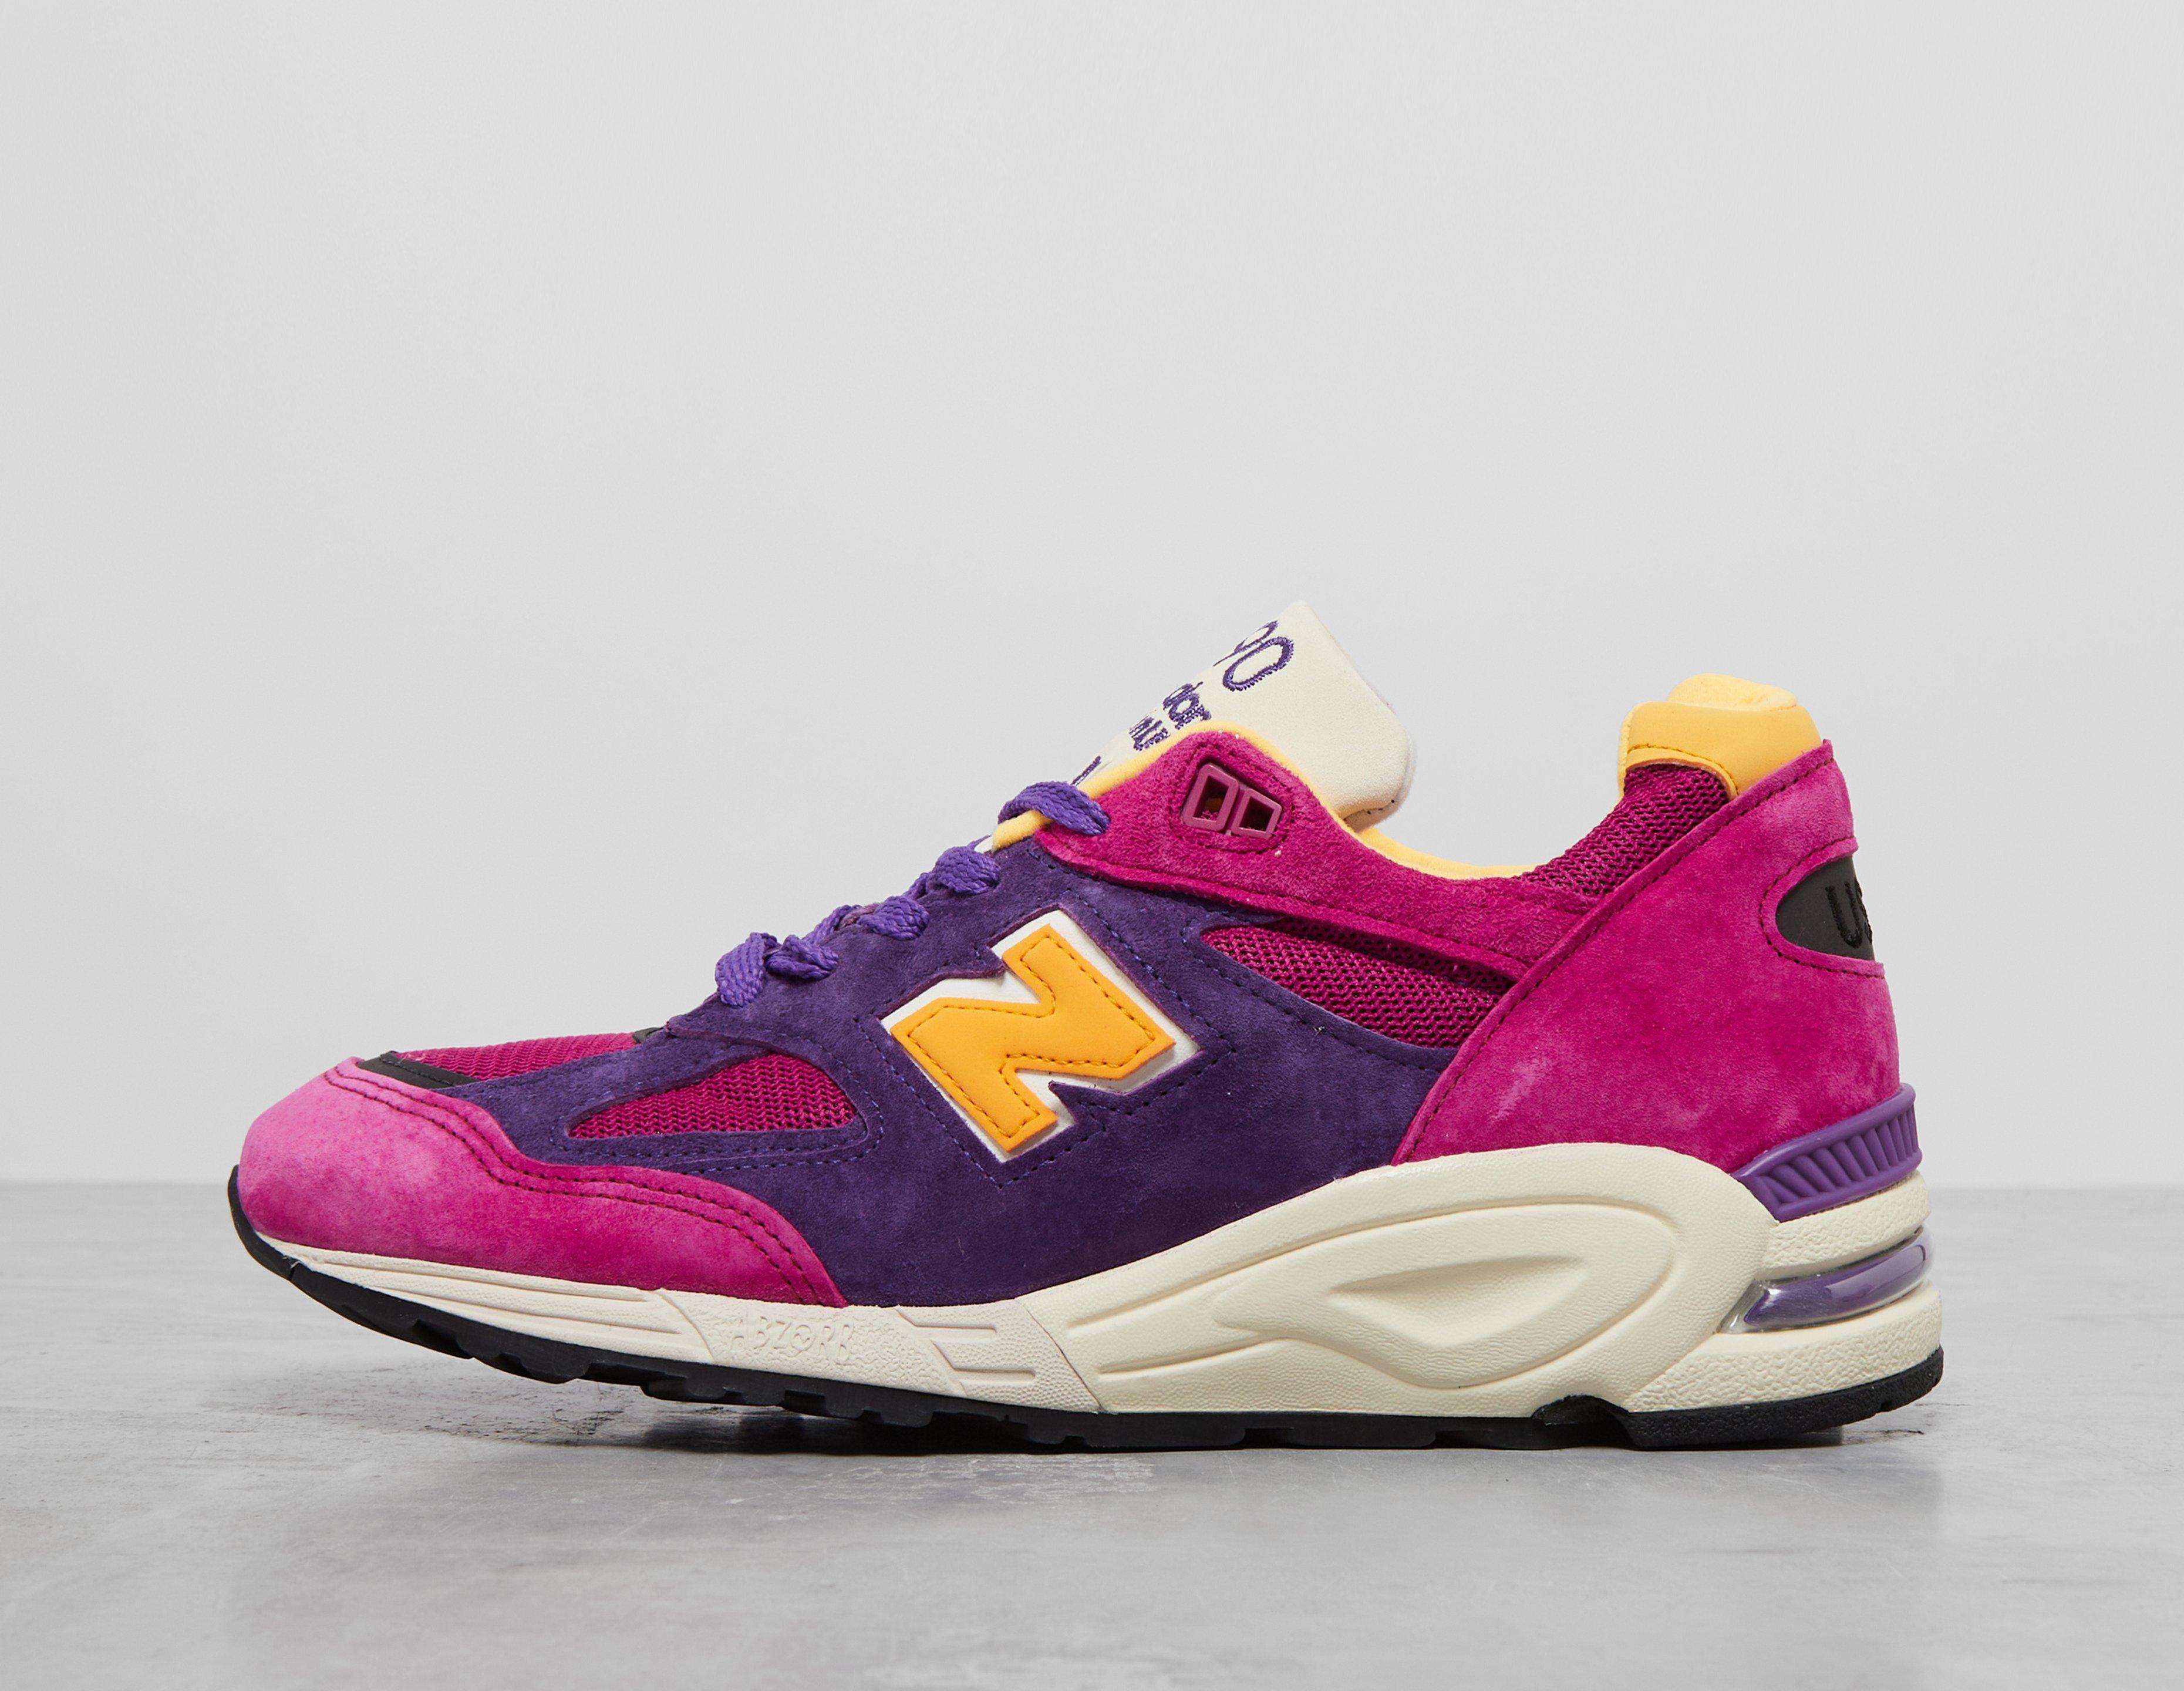 HealthdesignShops | New balance 574 core sneakers | black mens Balance shoes in low casual Purple Made USA New athletic lifestyle 990v2